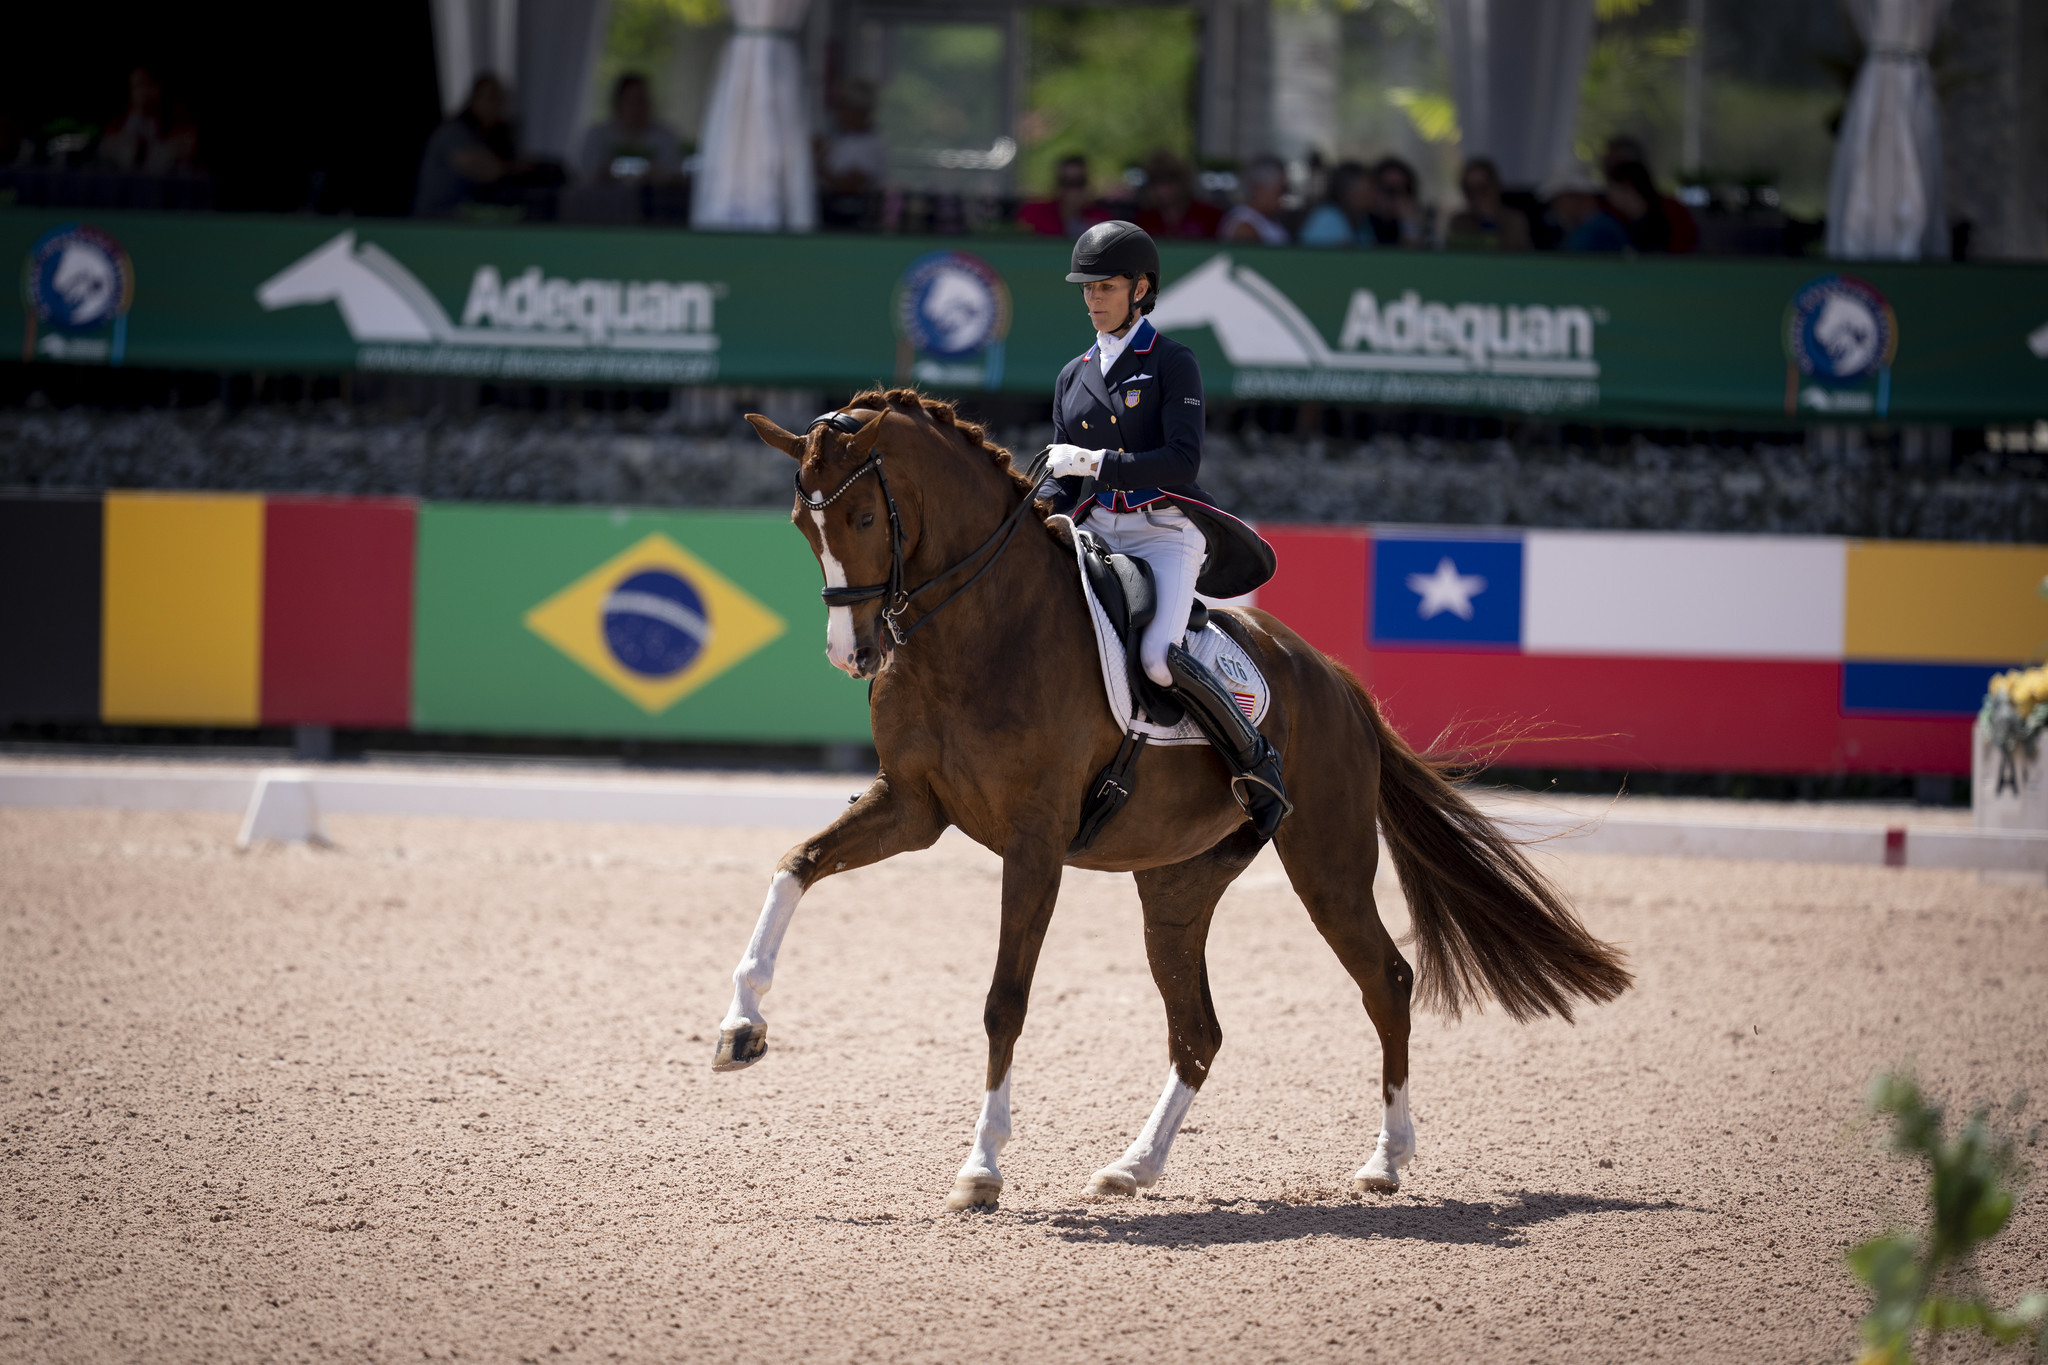 Bianca Berktold rides the KWPN mare Imperial during the Dressage Nations Cup ©FEI